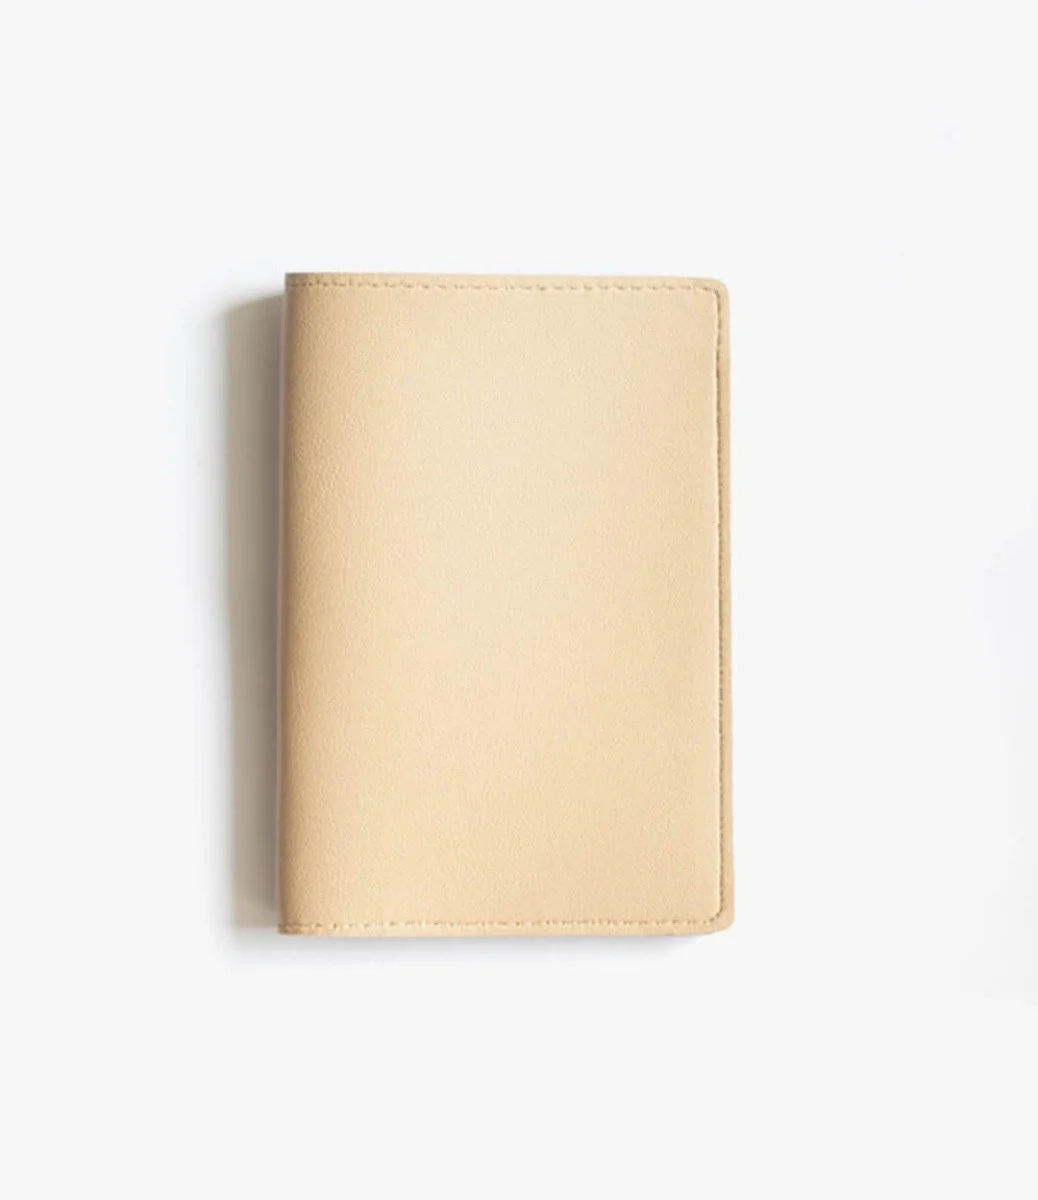 Vegan Leather Passport Cover - Linen White by Royal Page Co